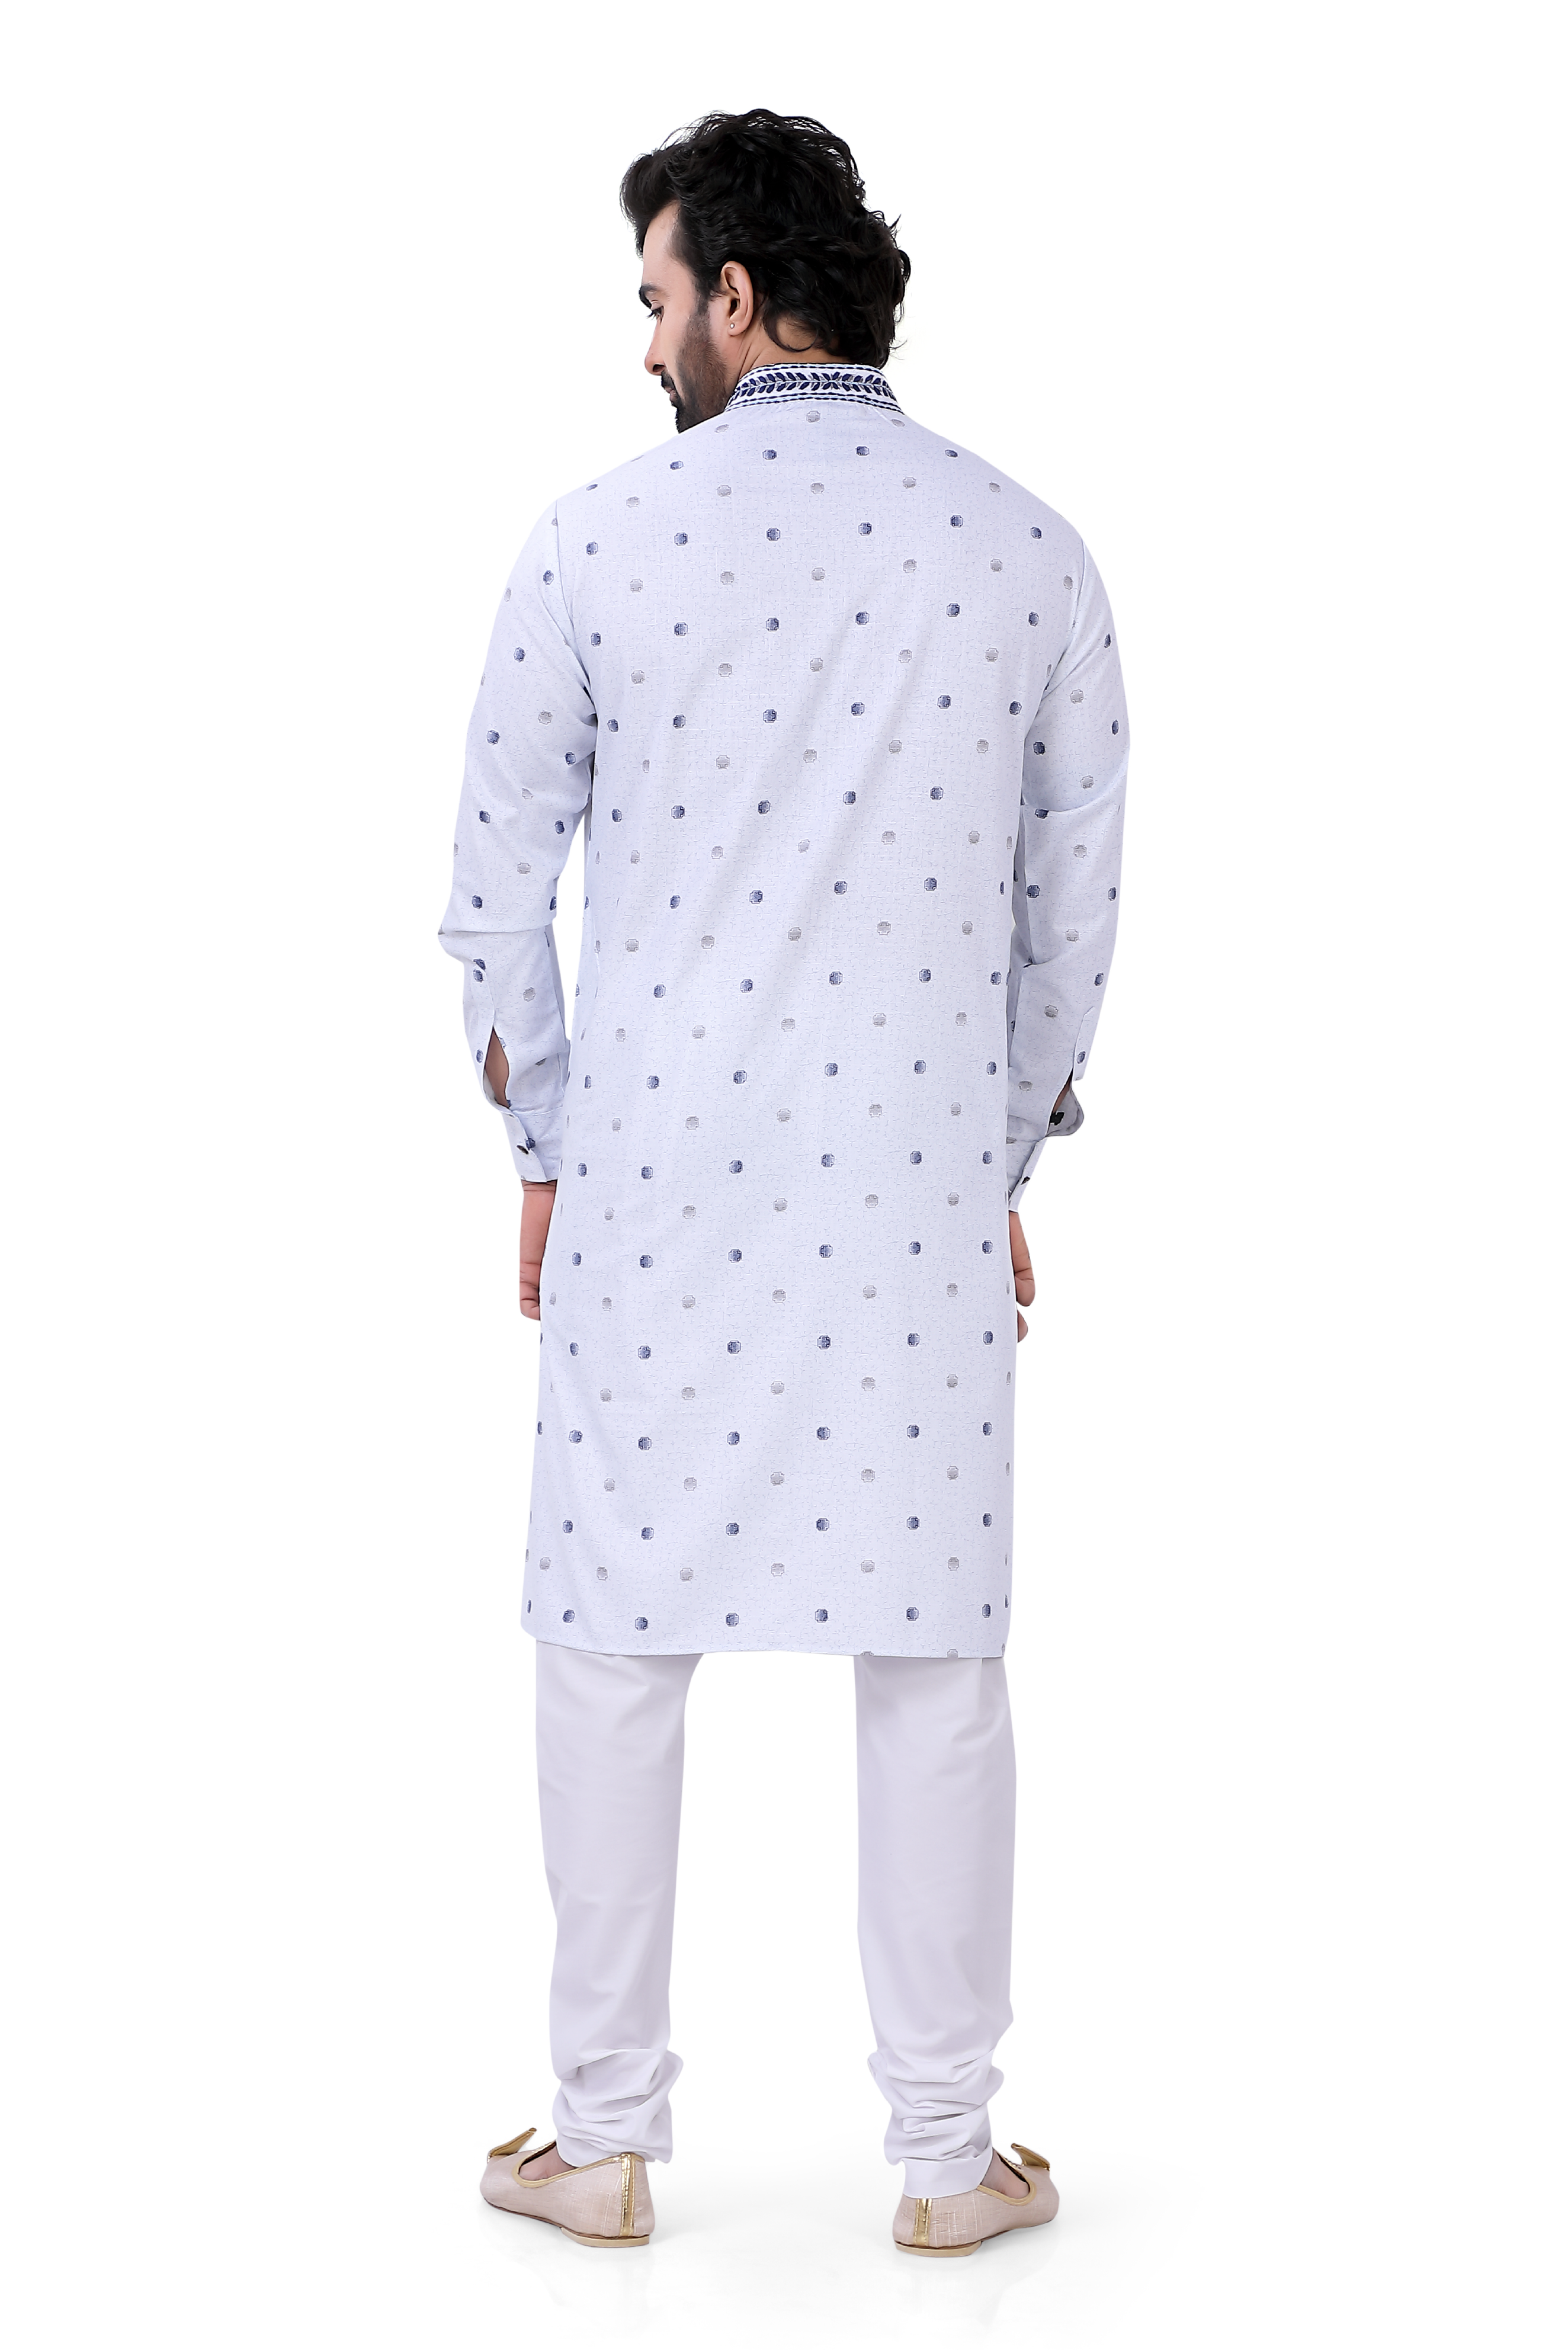 Cotton Printed Kurta and Pajama in white with thread embroidery